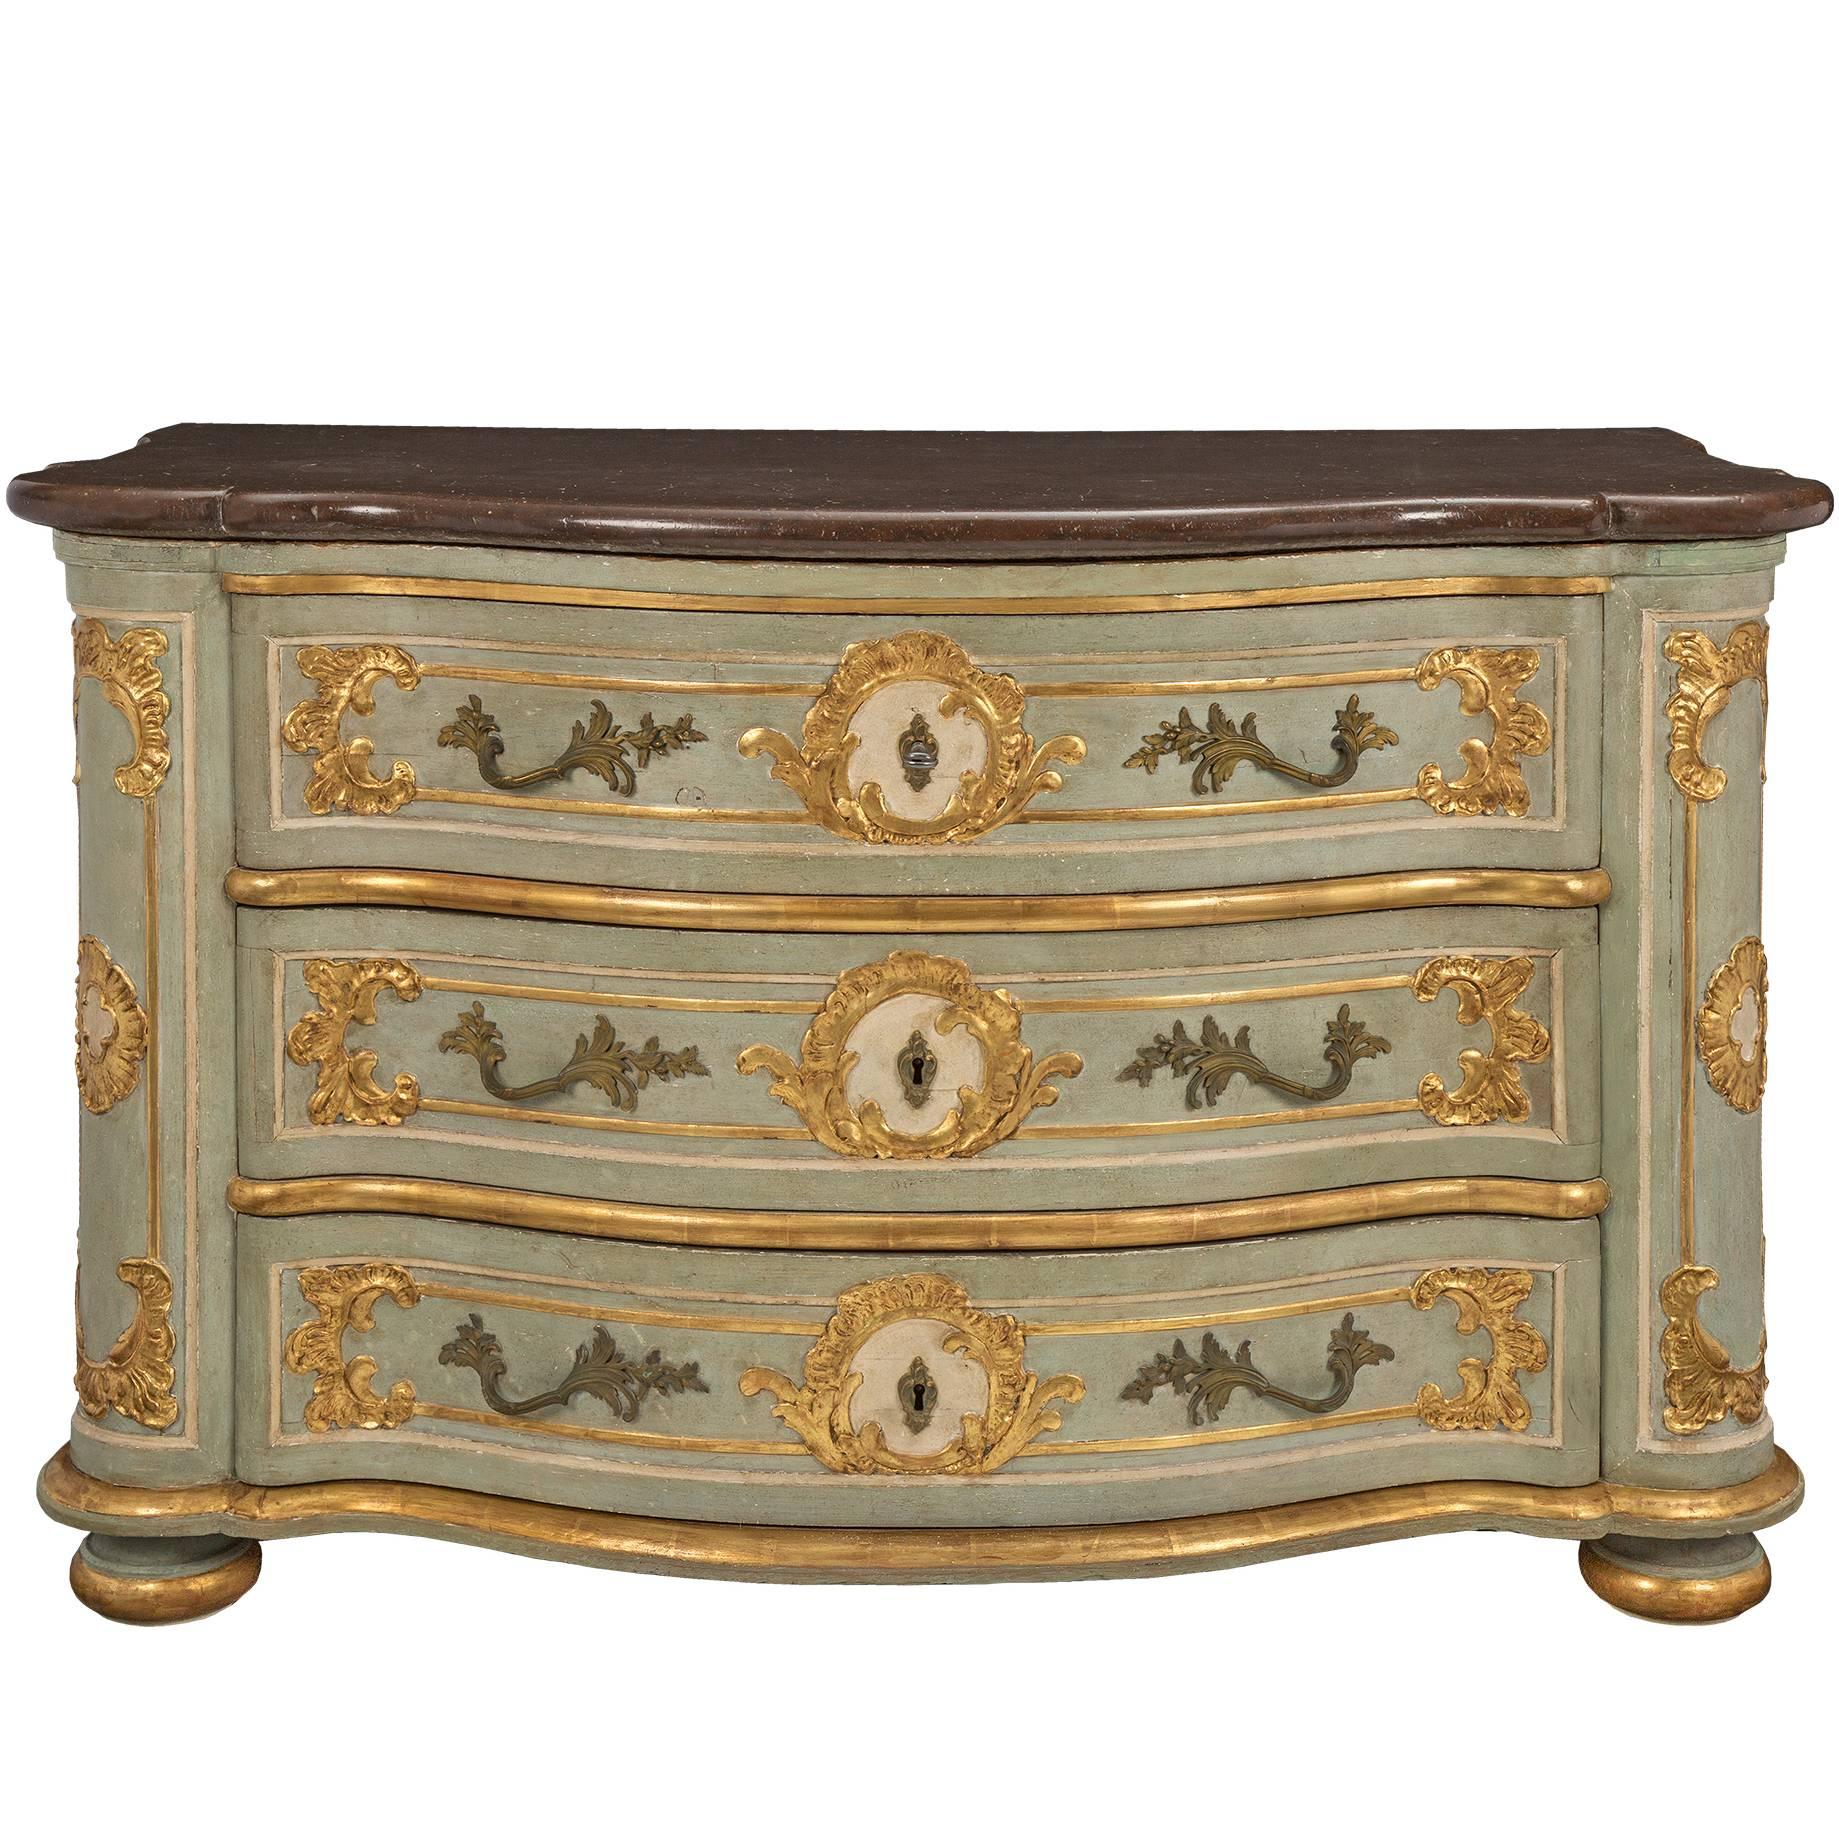 Italian Mid-18th Century Louis XV Period Patinated and Giltwood Venetian Chest